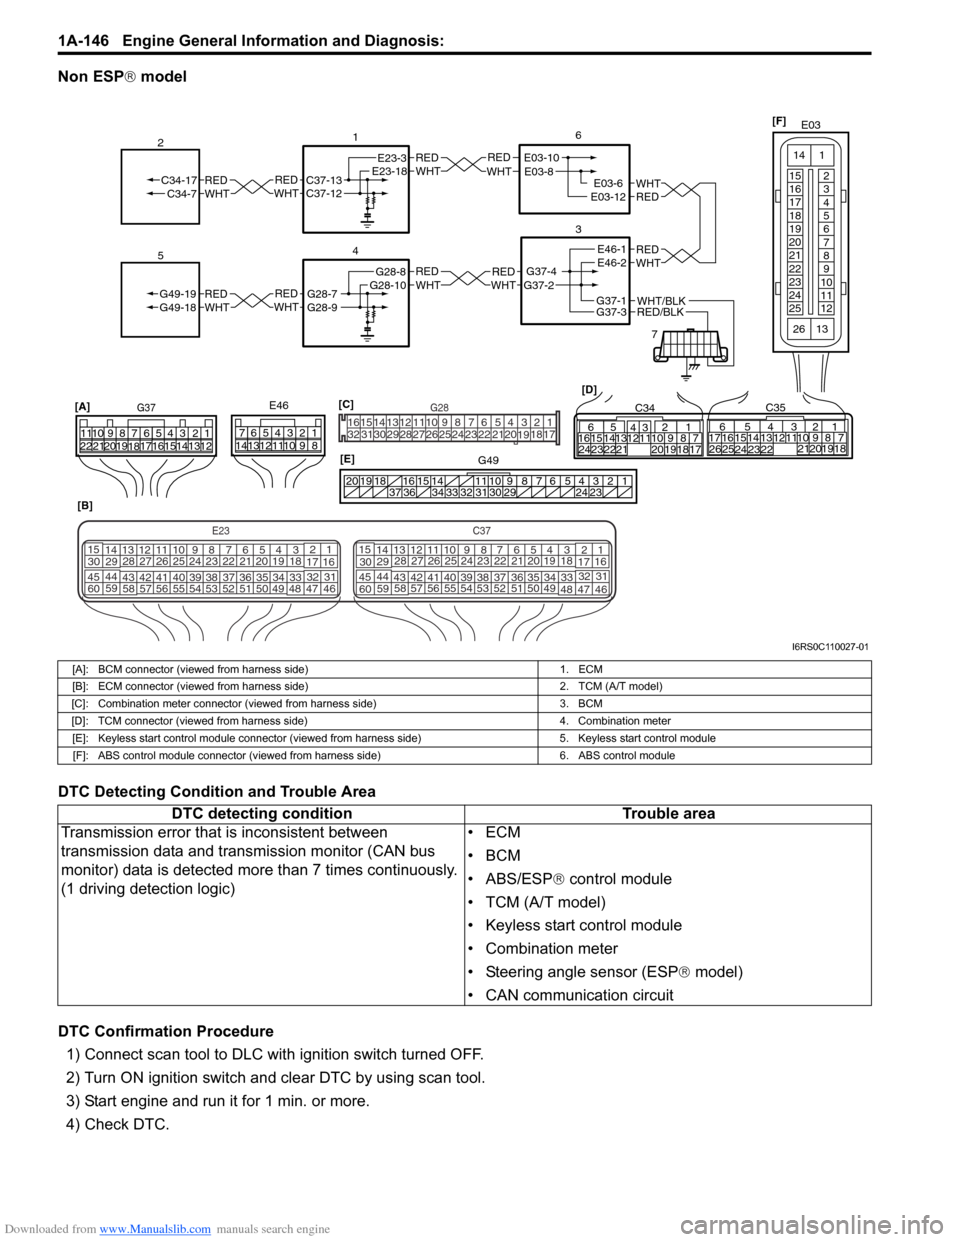 SUZUKI SWIFT 2007 2.G Service Workshop Manual Downloaded from www.Manualslib.com manuals search engine 1A-146 Engine General Information and Diagnosis: 
Non ESP® model
DTC Detecting Condition and Trouble Area
DTC Confirmation Procedure 1) Connec